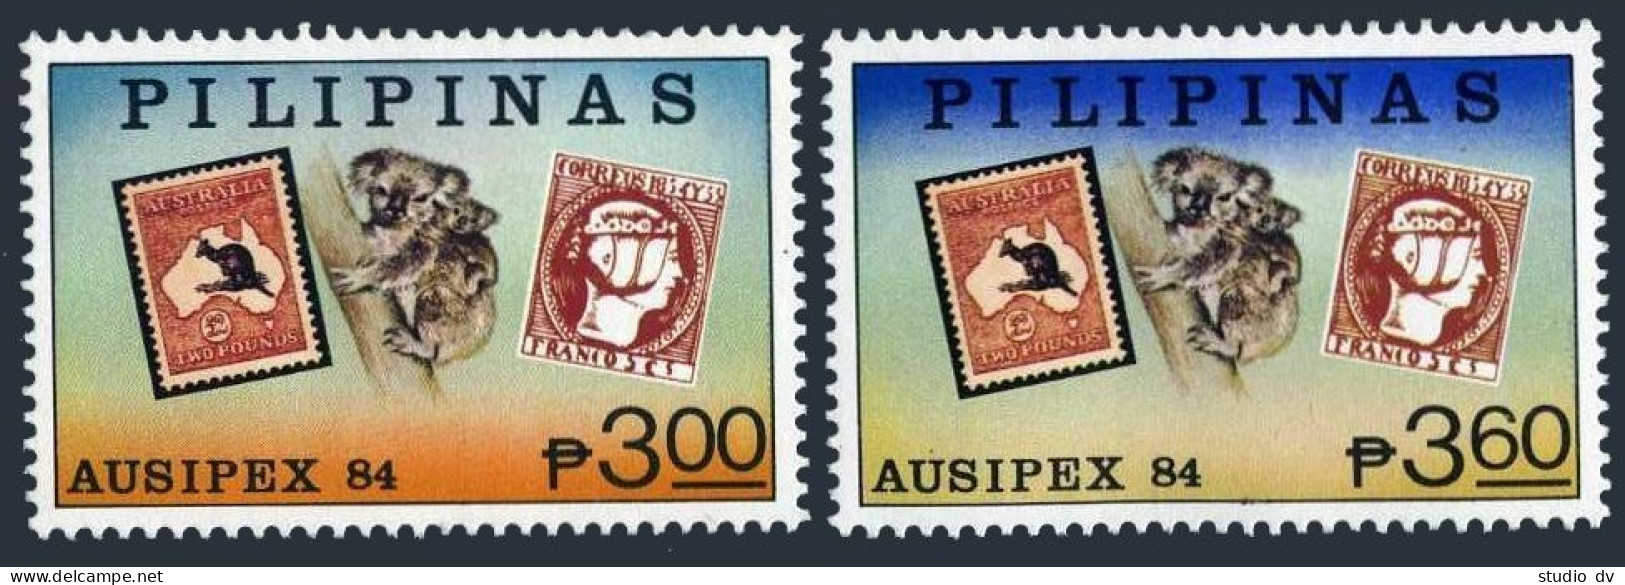 Philippines 1708-1709,1710 Sheets Perf & Imprerf. MNH. AUSIPEX-1984. Koalas. - Philippines